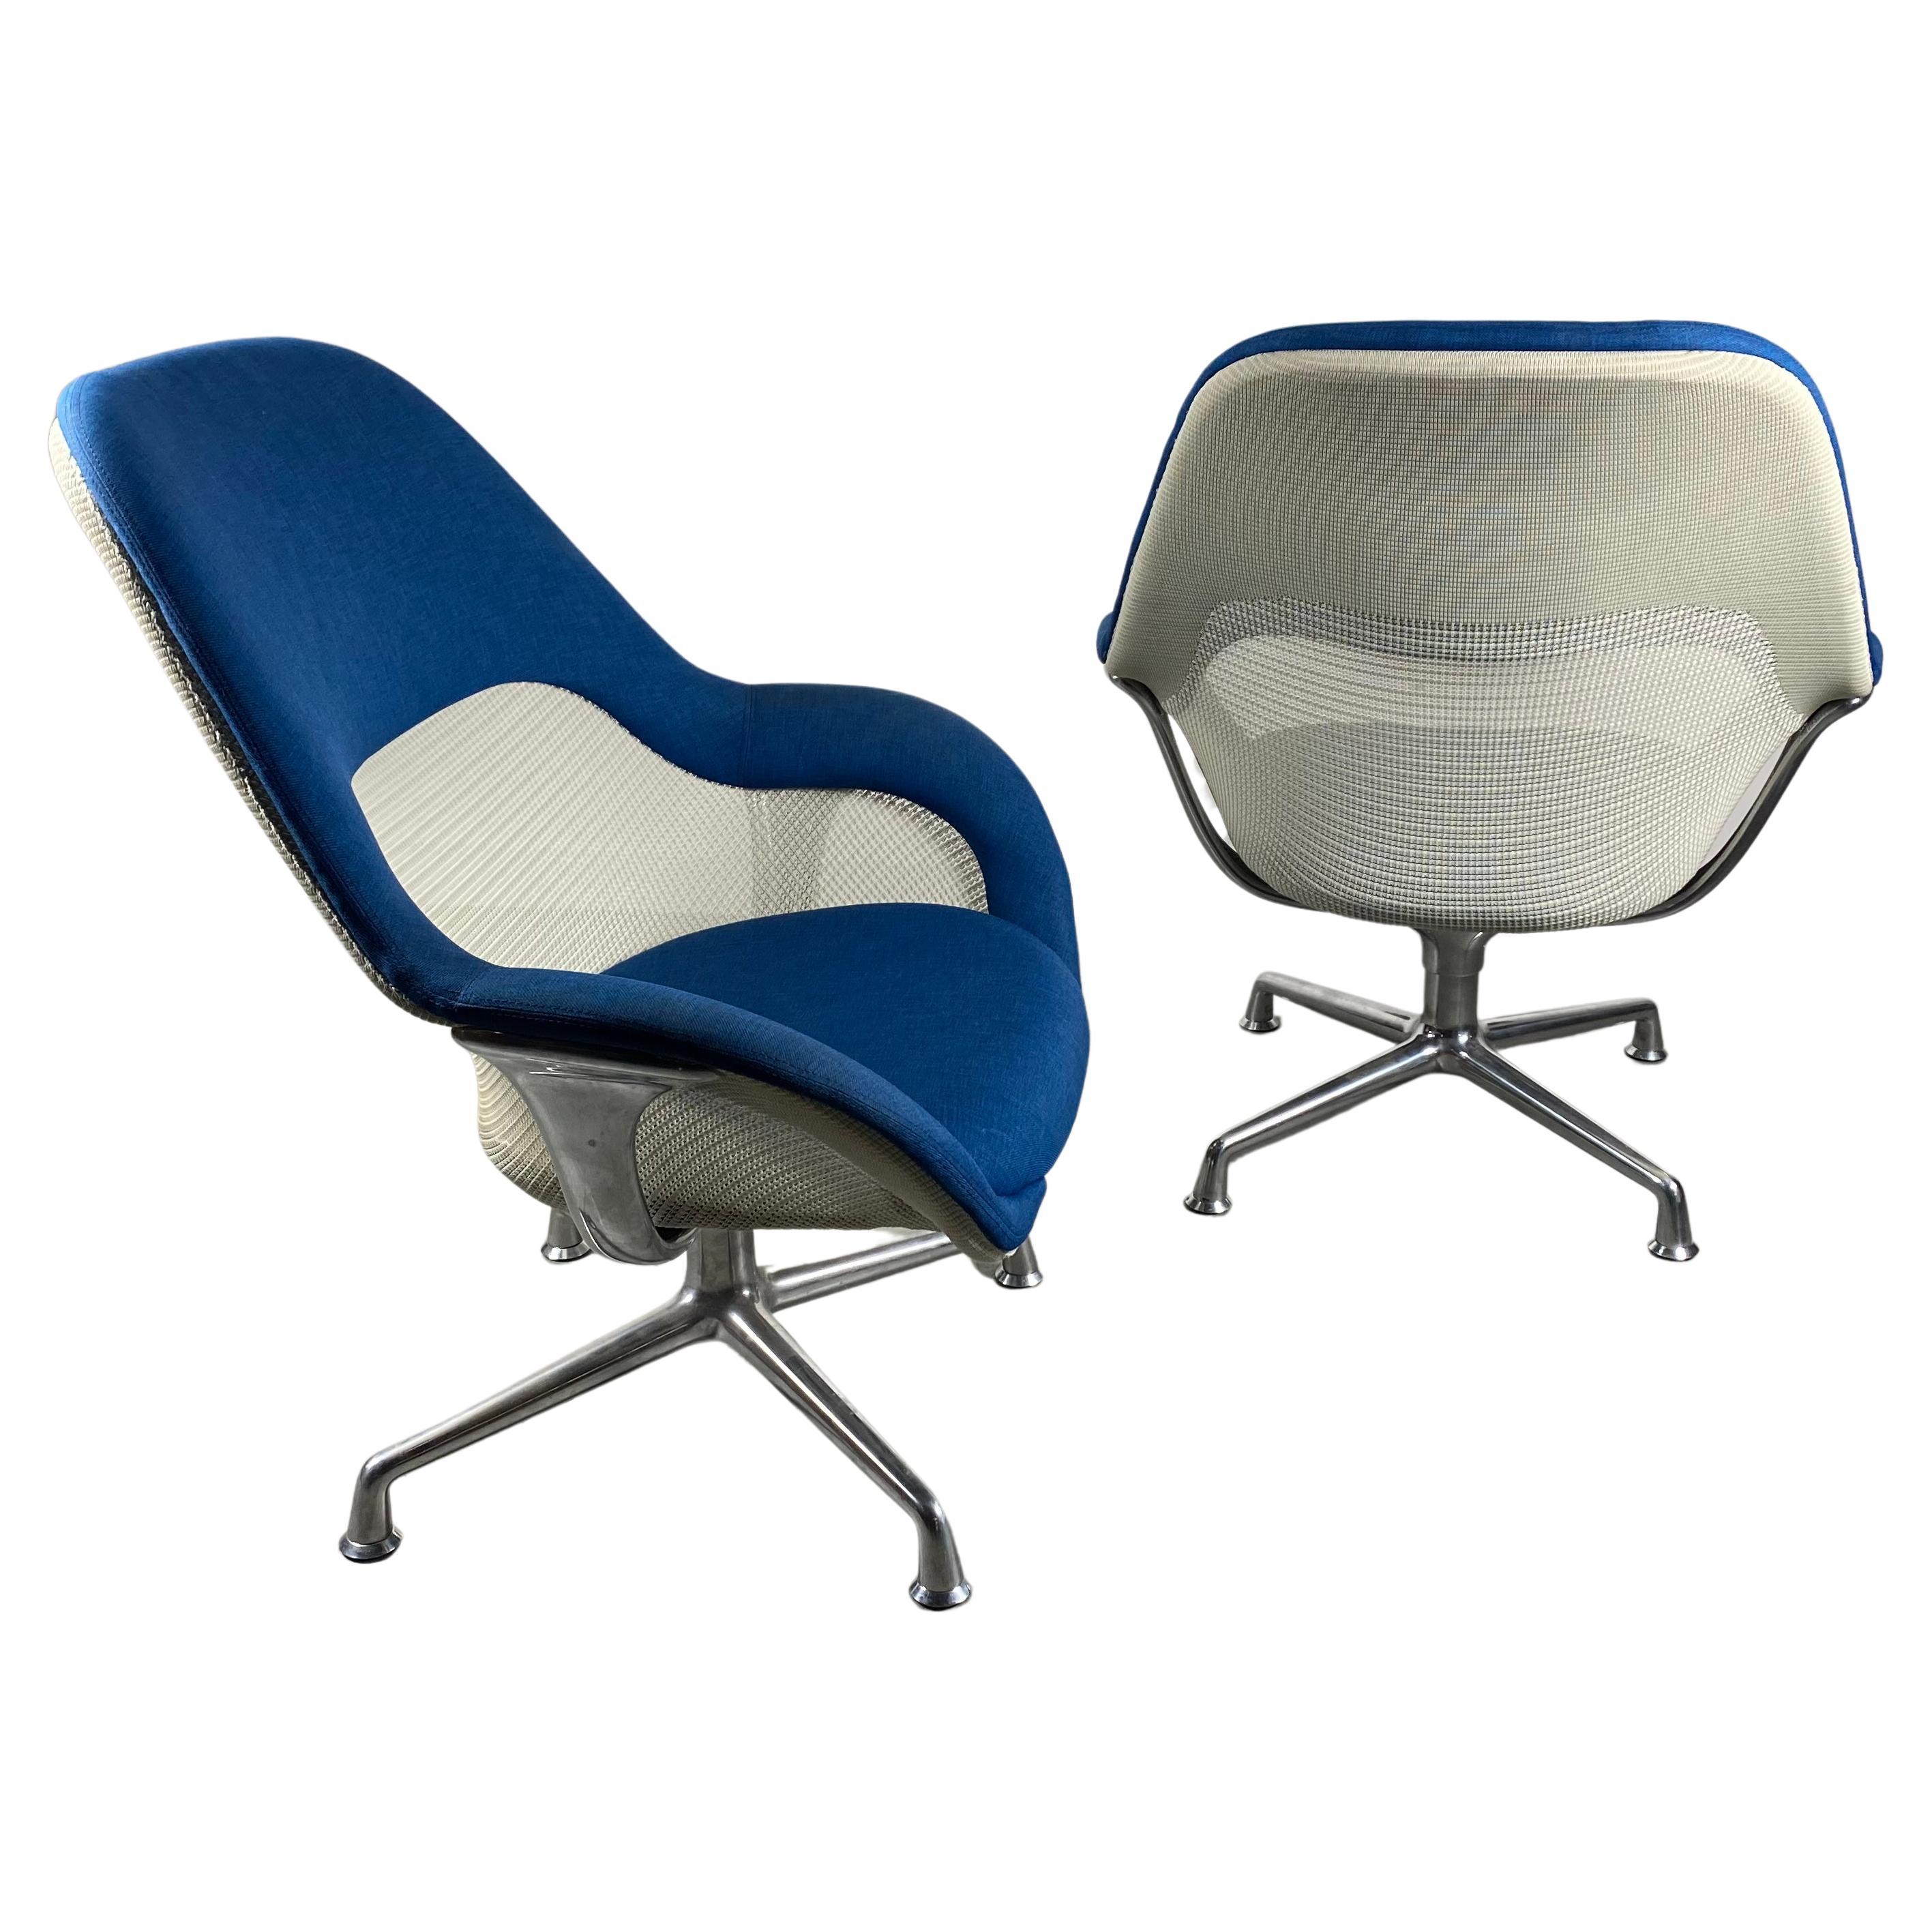 Pair High Back Modernist Swivel Lounge Chairs, " Coaleese" for Steelcase